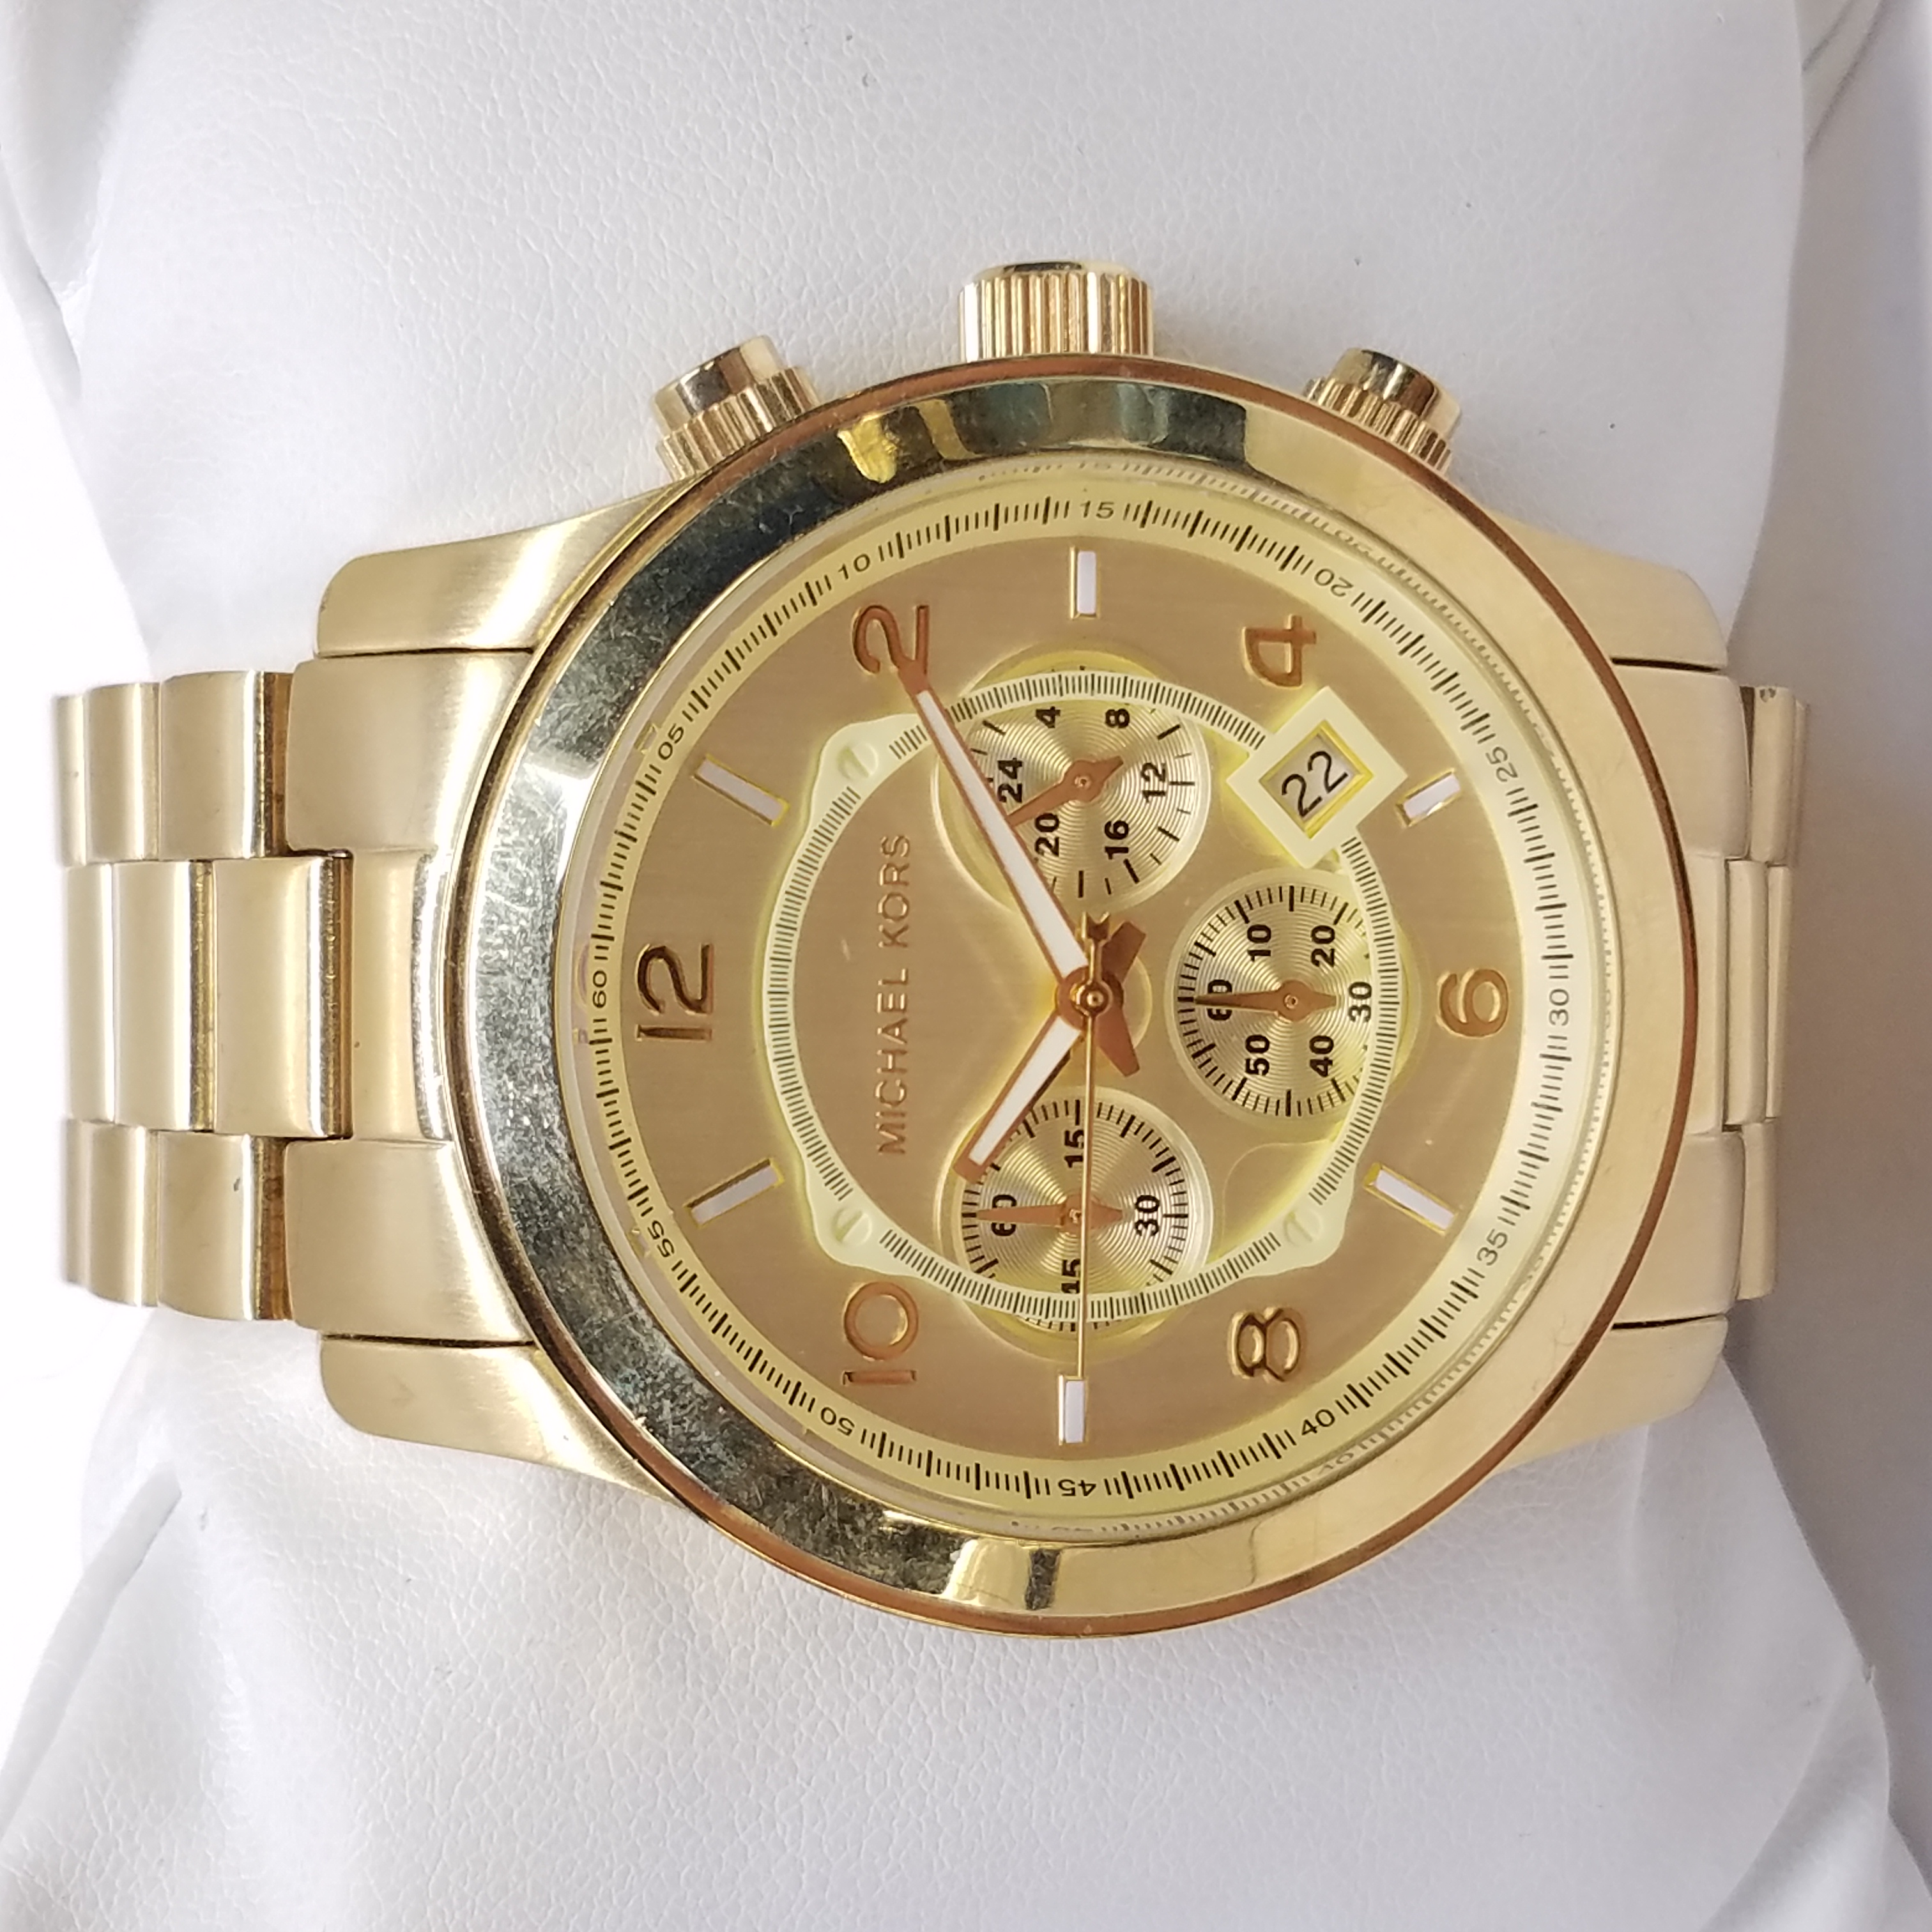 Buy the Michael Kors MK-8077 Gold Tone Multi-Dial Watch | GoodwillFinds